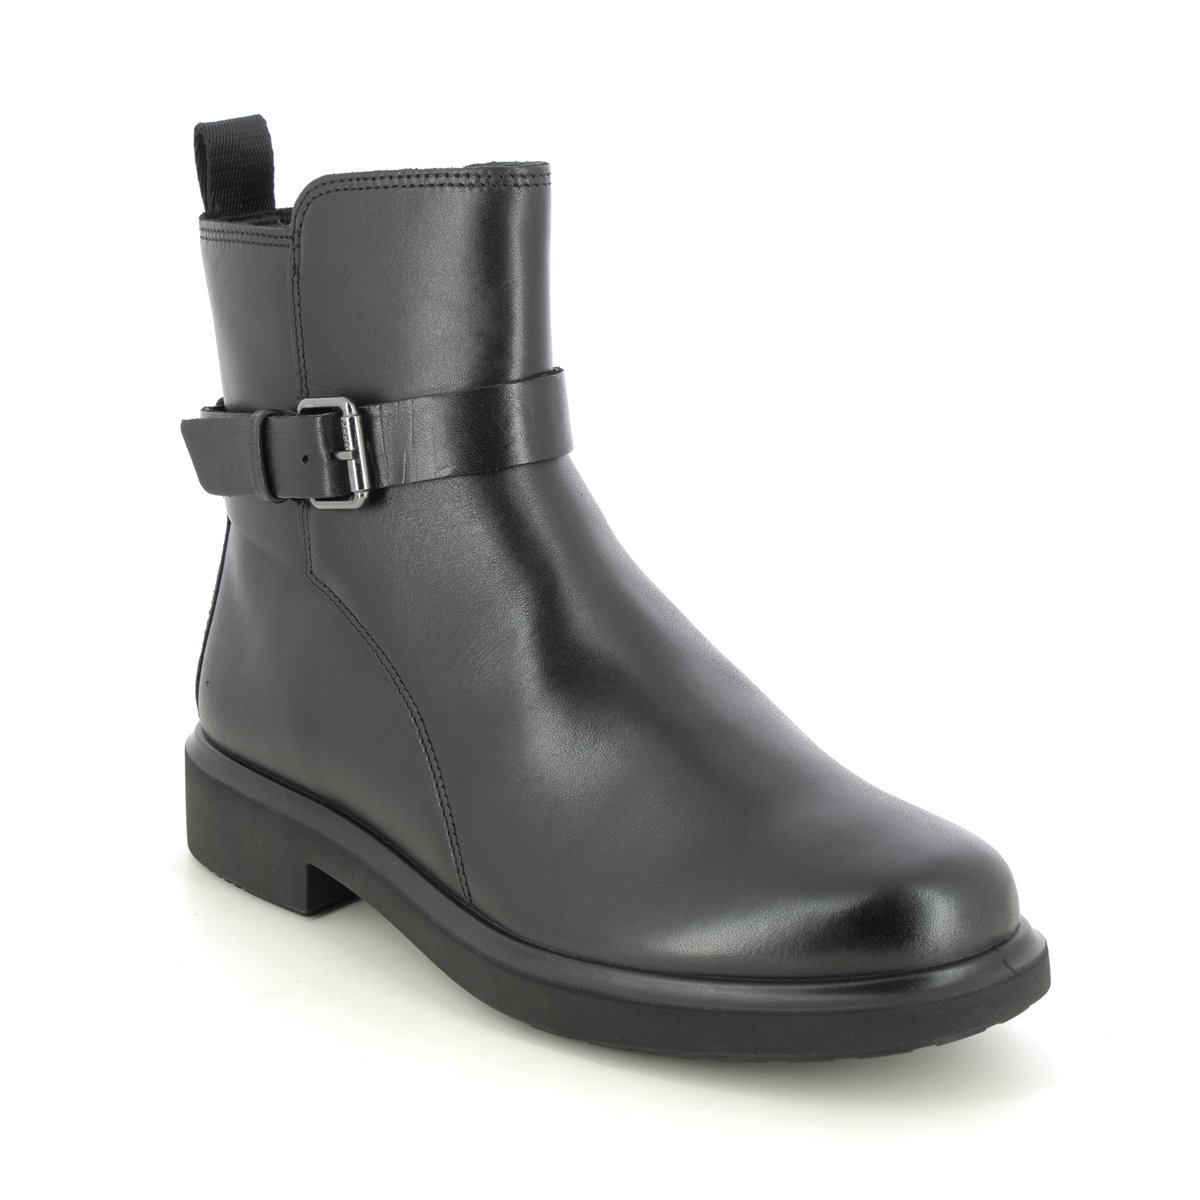 Ecco Amsterdam Tex Metropole Black Leather Womens Ankle Boots 222013-01001 In Size 37 In Plain Black Leather